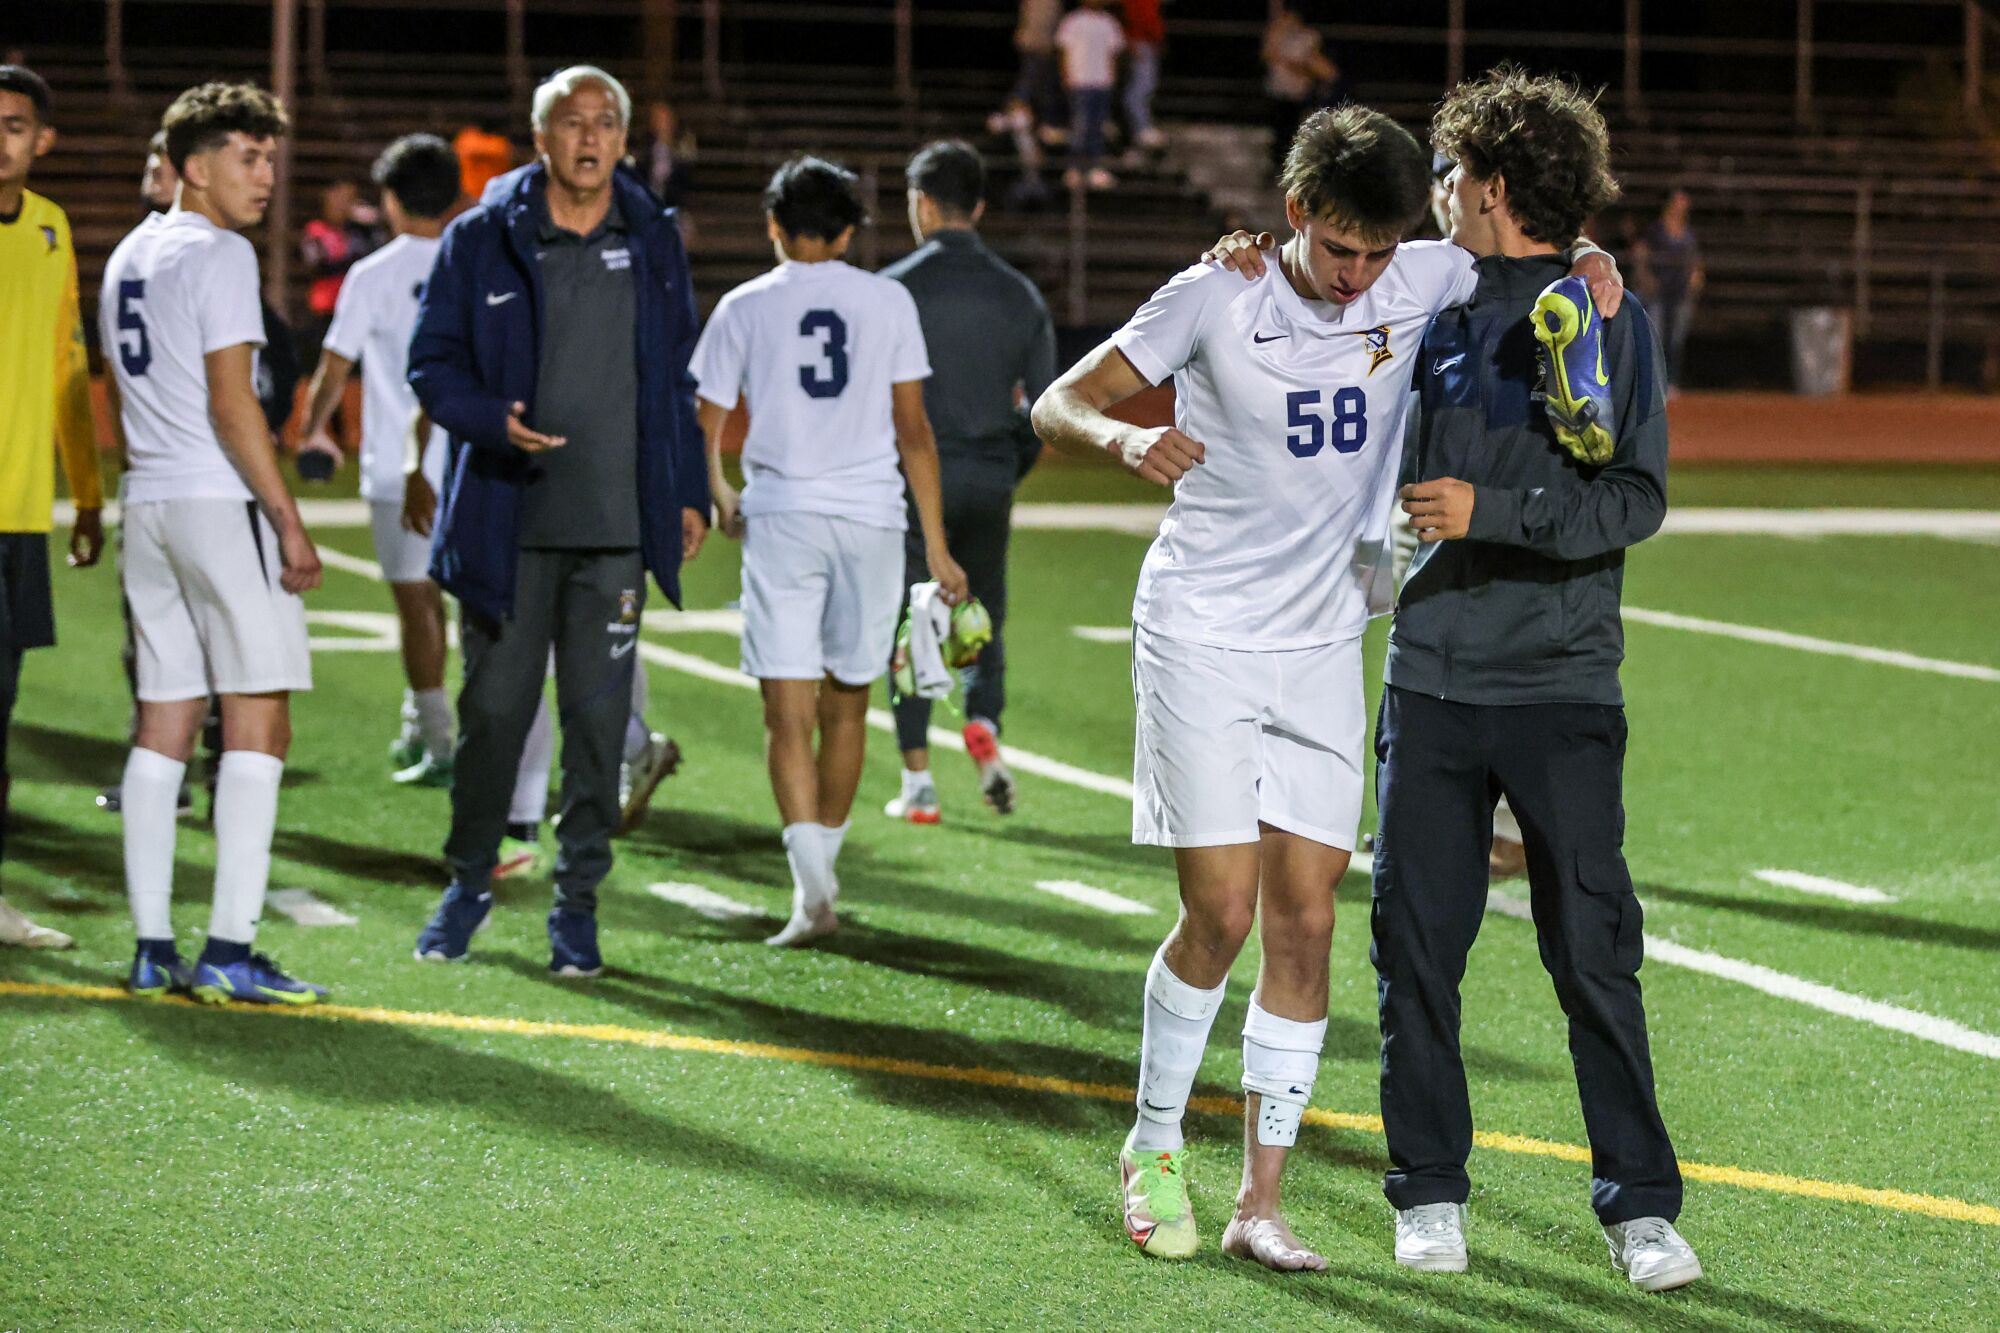 Birmingham's David Diaz is helped off the field after injuring his leg during a 3-1 loss to El Camino Real.